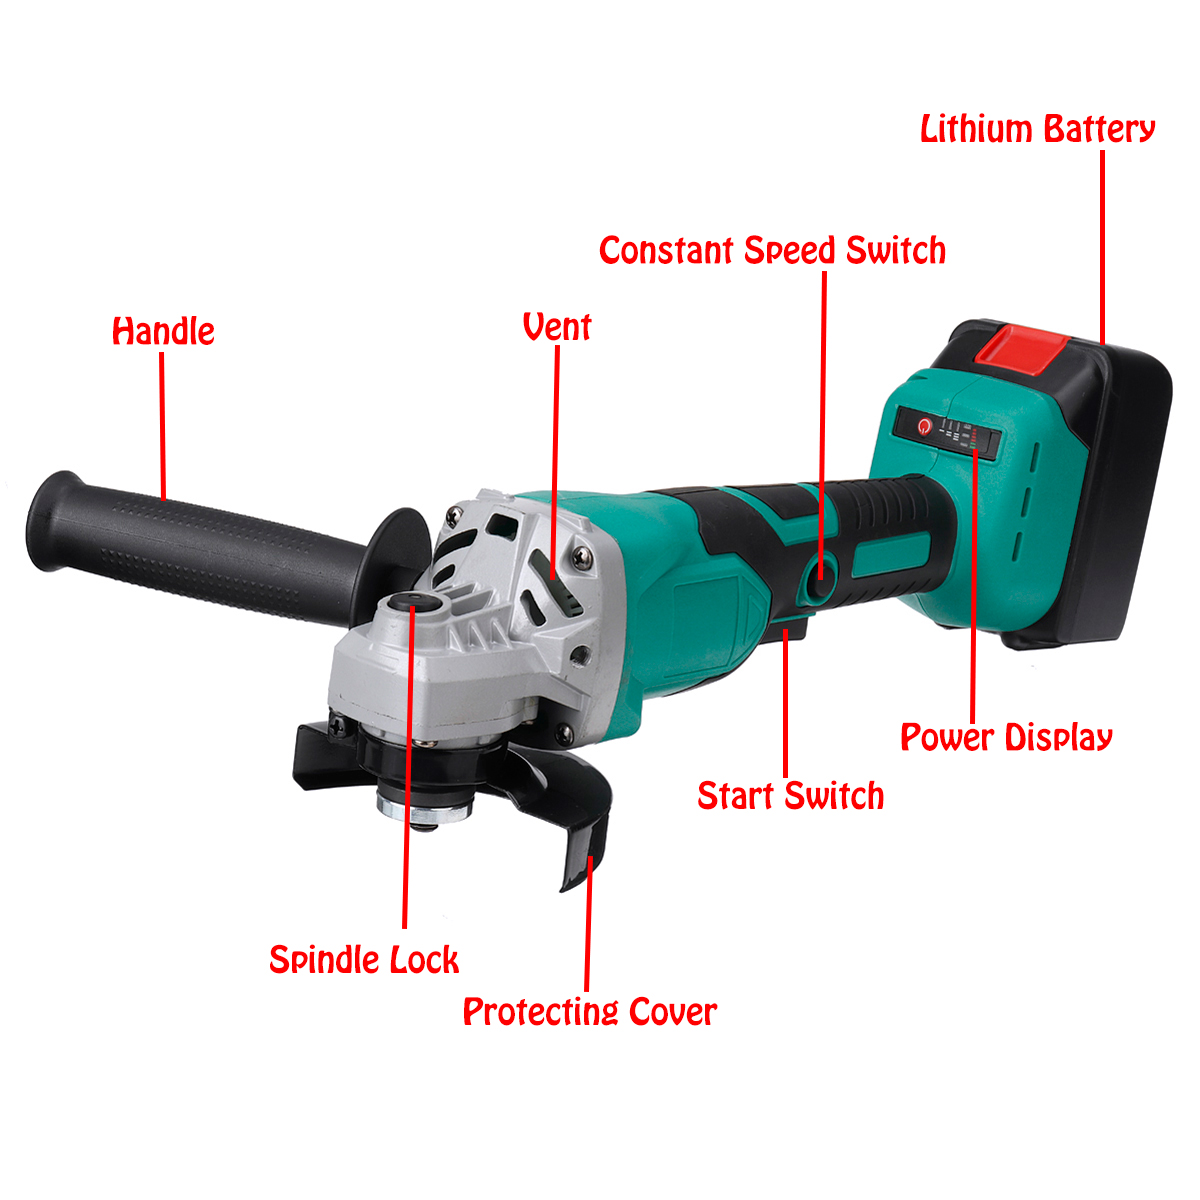 100mm125mm-Brushless-Electric-Angle-Grinder-Polishing-Grinding-Cutting-Tool-W-12-Battery-For-Makita-1861077-8